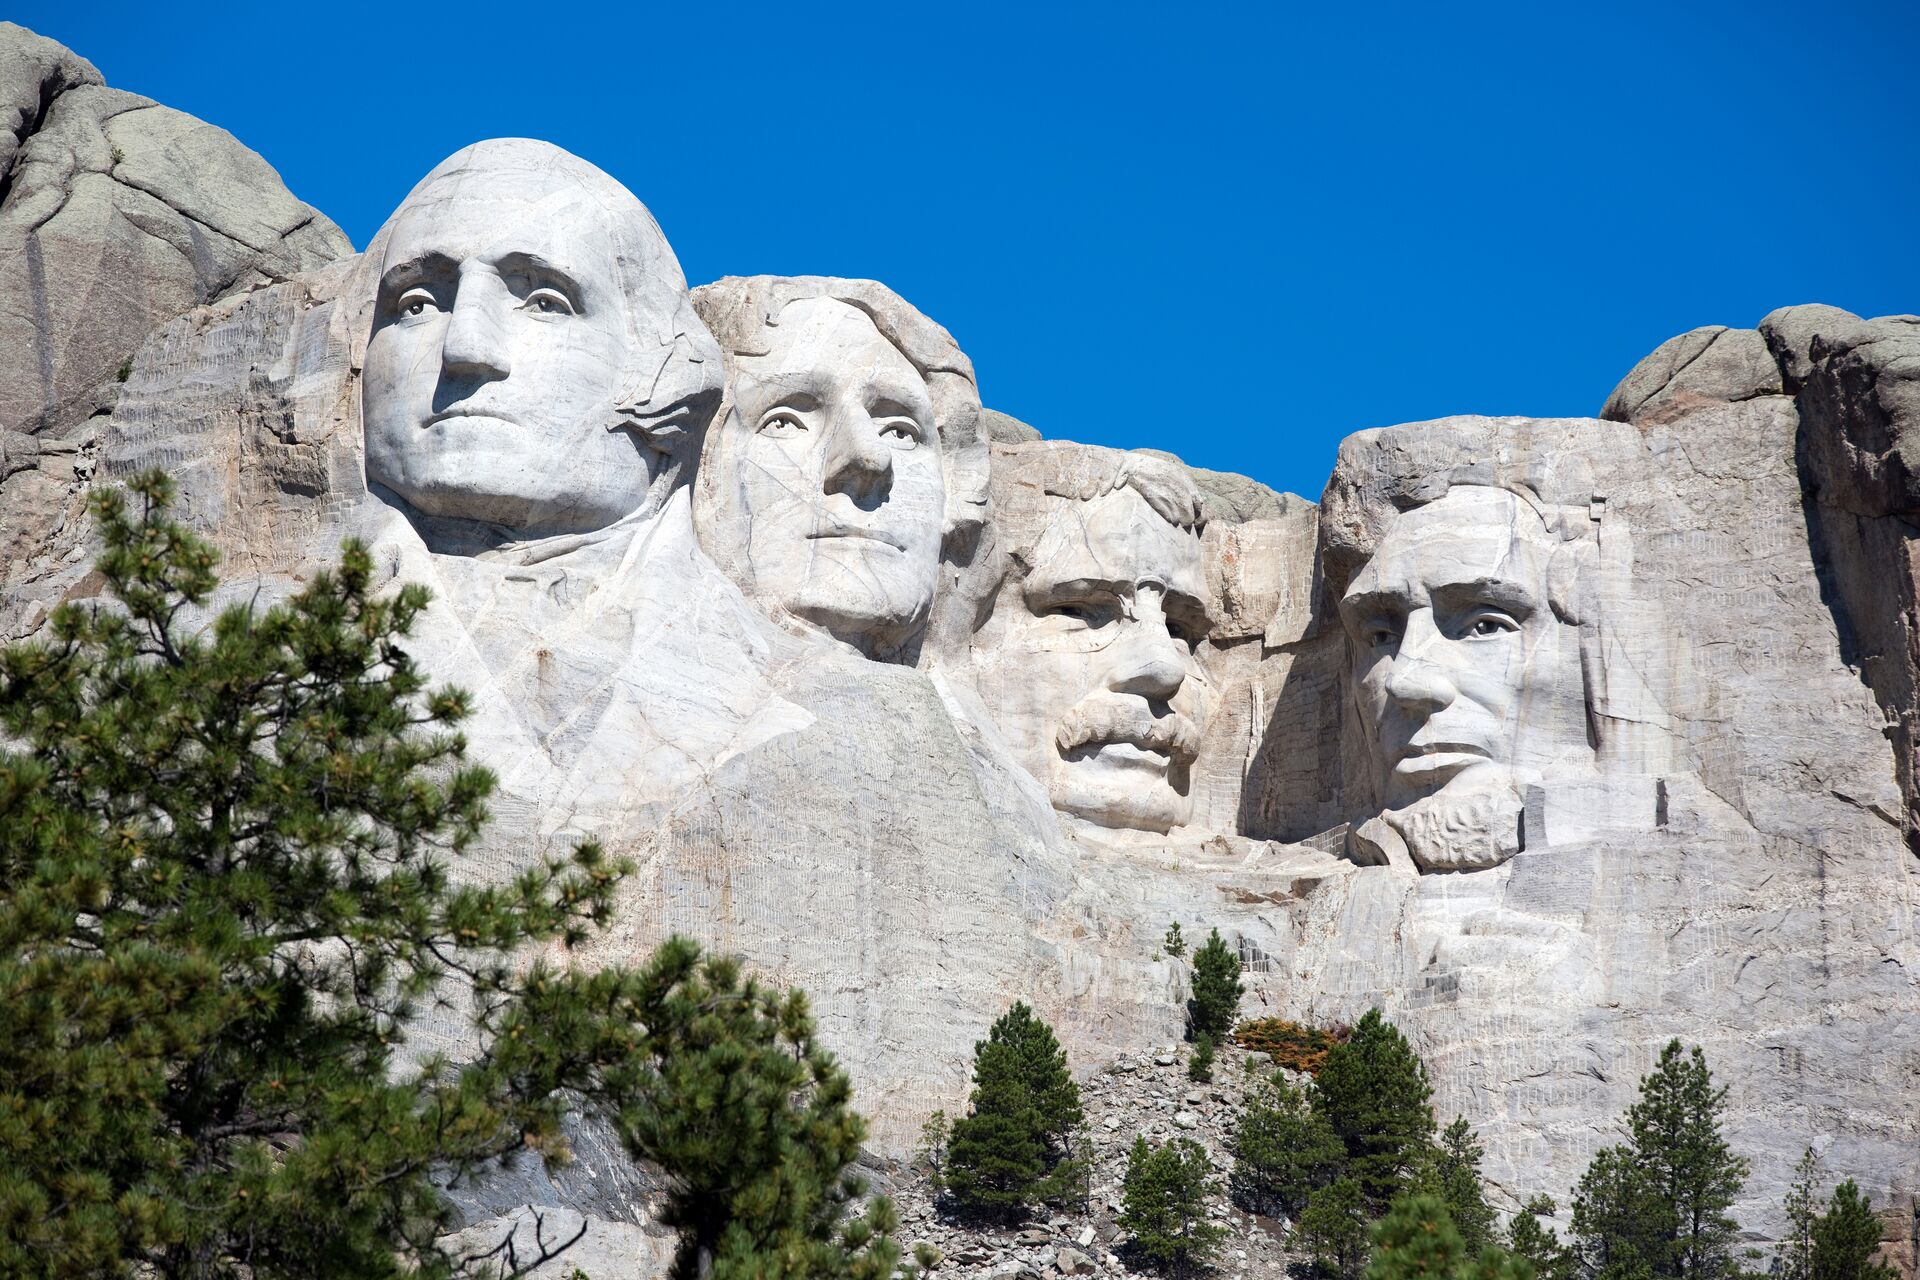 Mount Rushmore: An American icon with a complex legacy